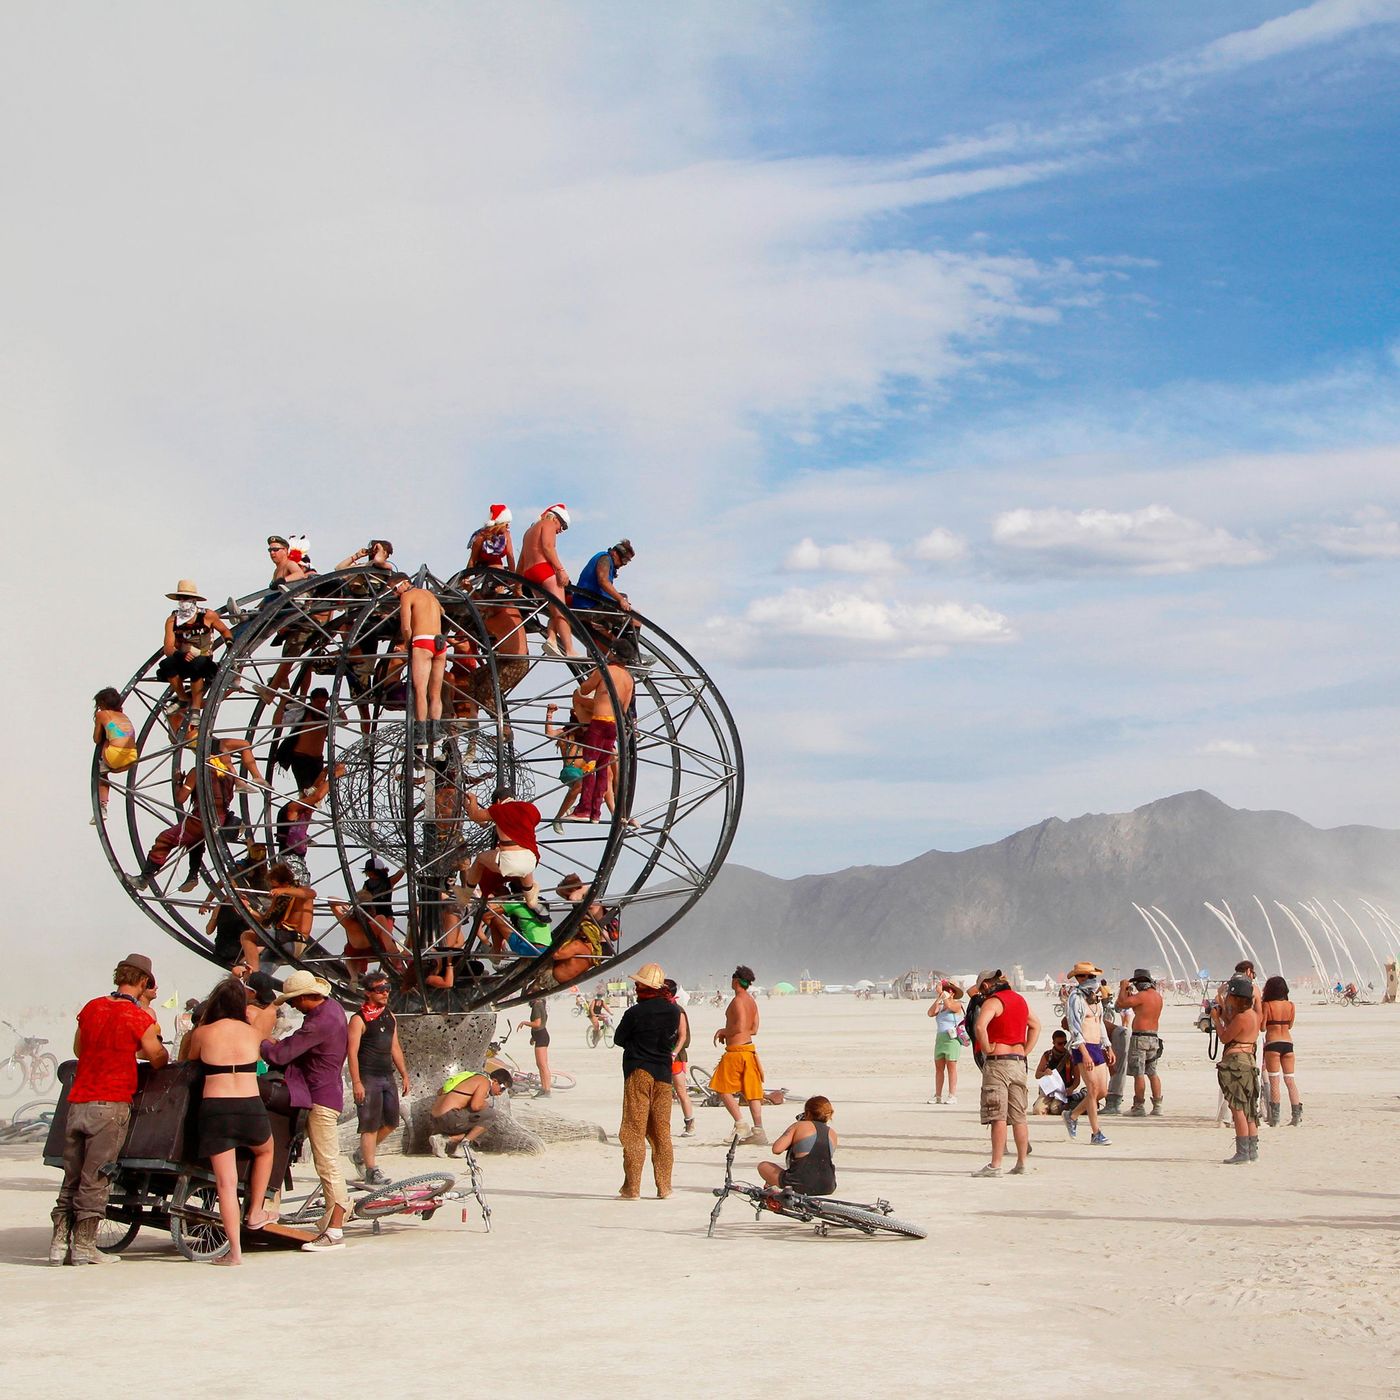 Burning Man Faces Off Against Ormat Geothermal Project